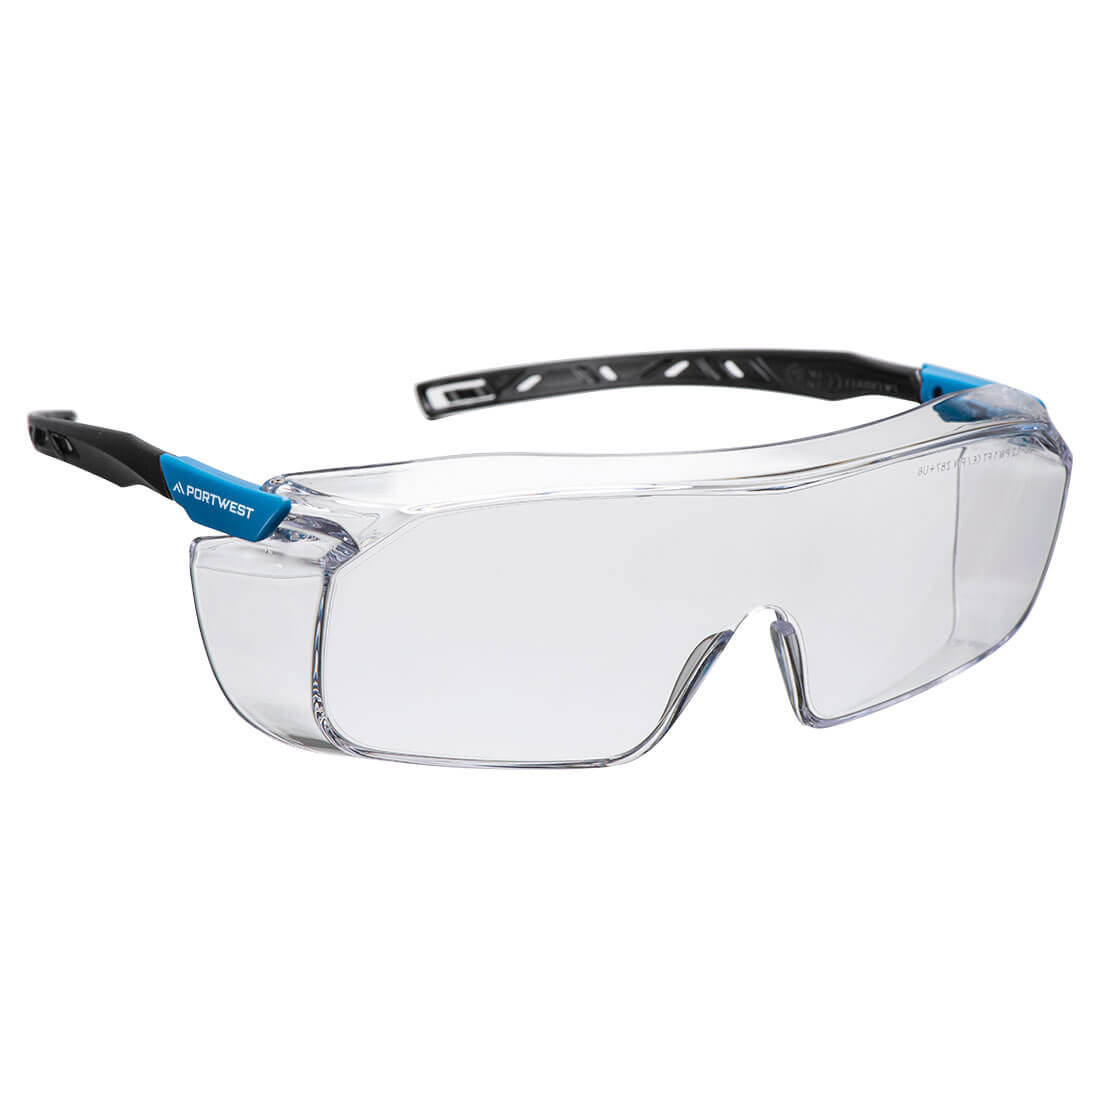 OVER SPECTACLE TOP OTG SAFETY ANTI SCRATCH UV + EYE PROTECTION CE EYEWEAR GLASSES